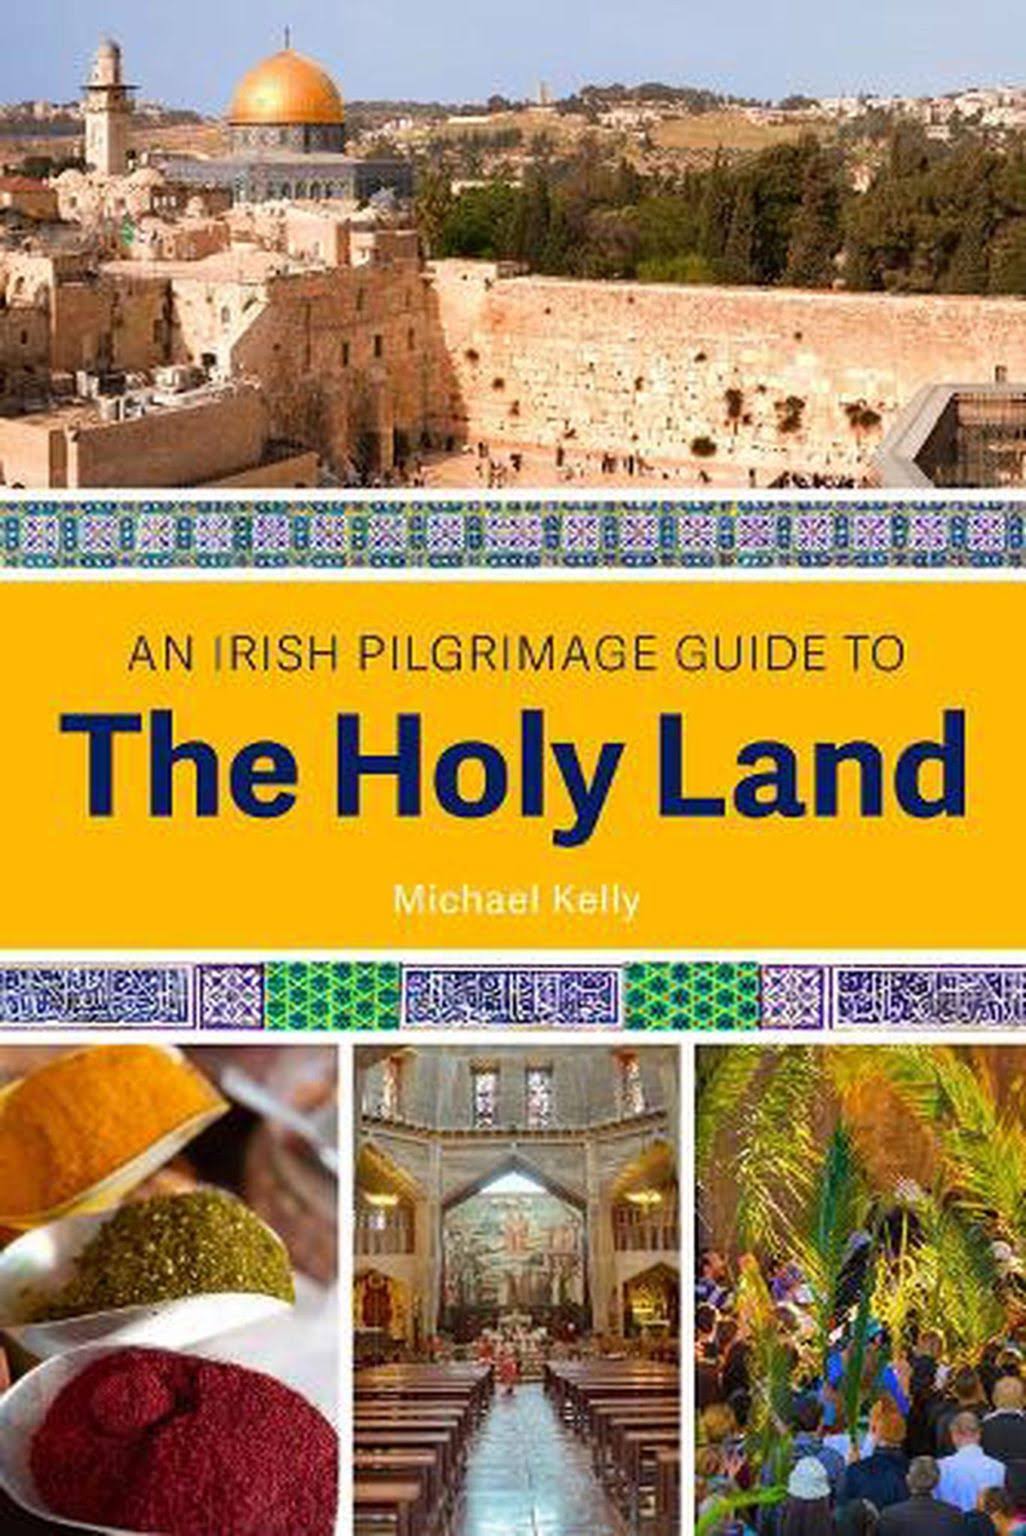 An Irish Pilgrimage Guide to the Holy Land [Book]